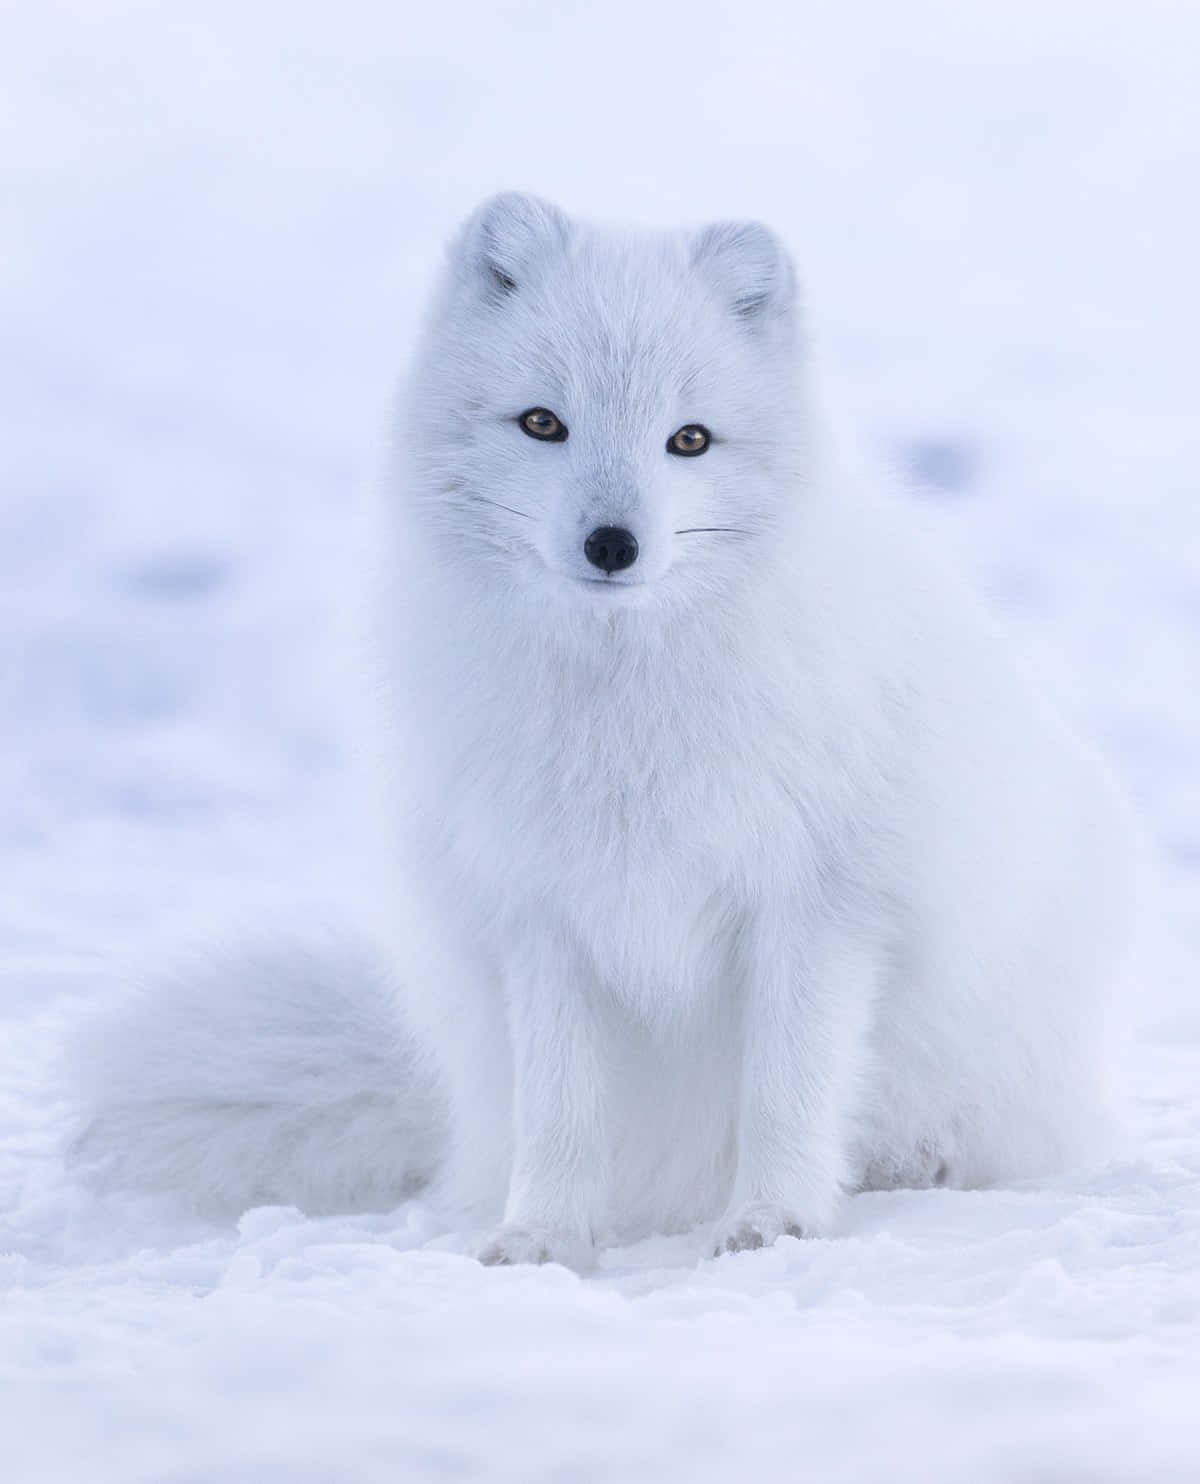 A white Arctic fox taking shelter from the snow.